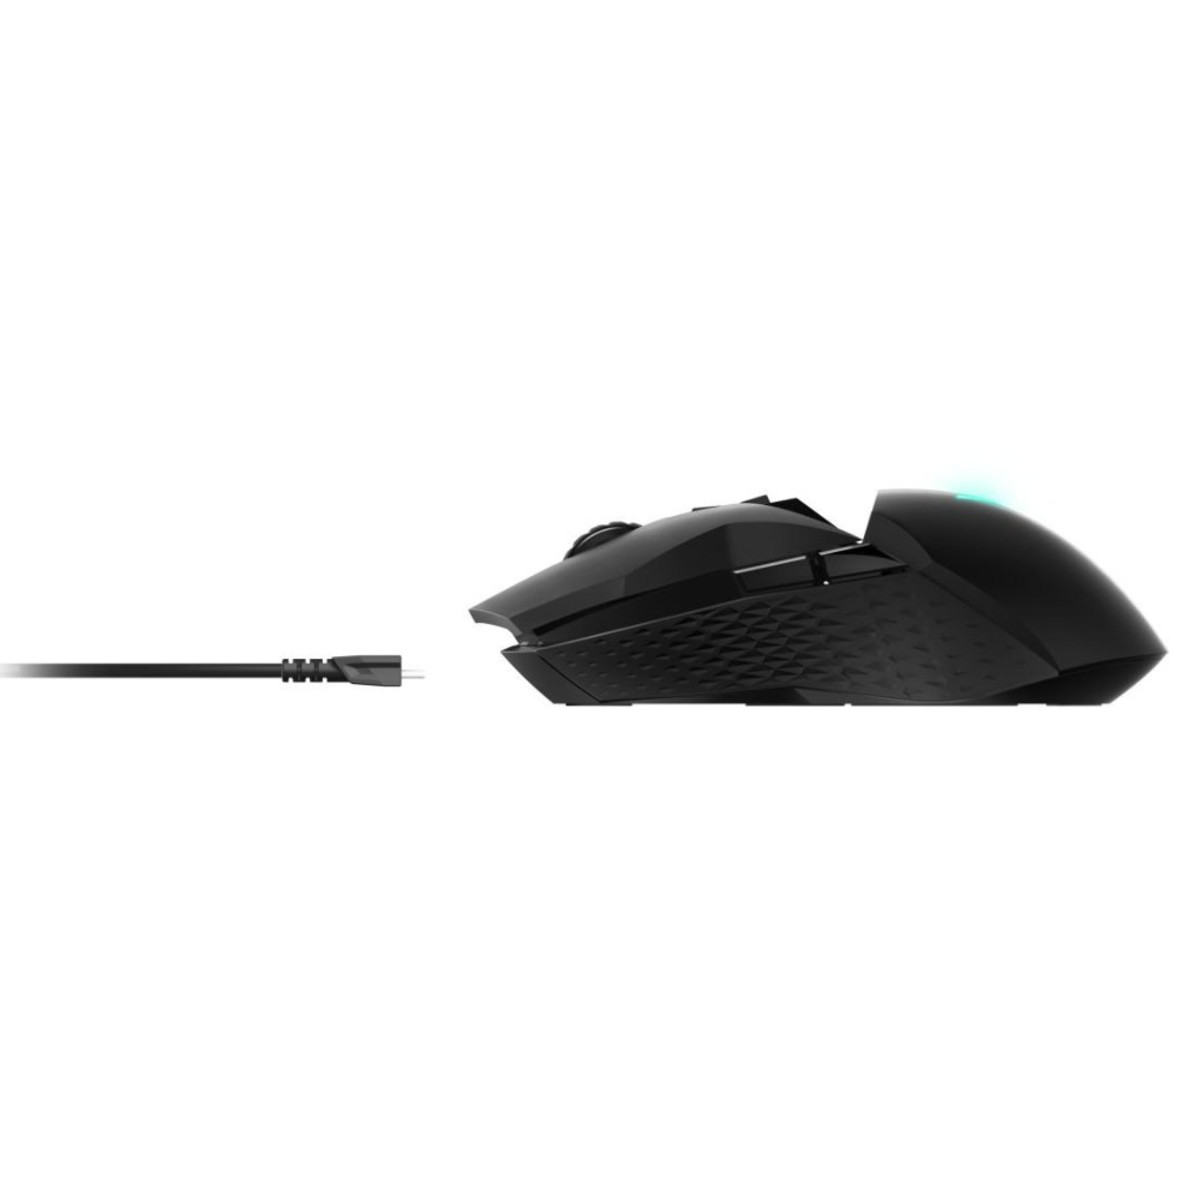 VT950 Gaming Wireless & Wired Mouse